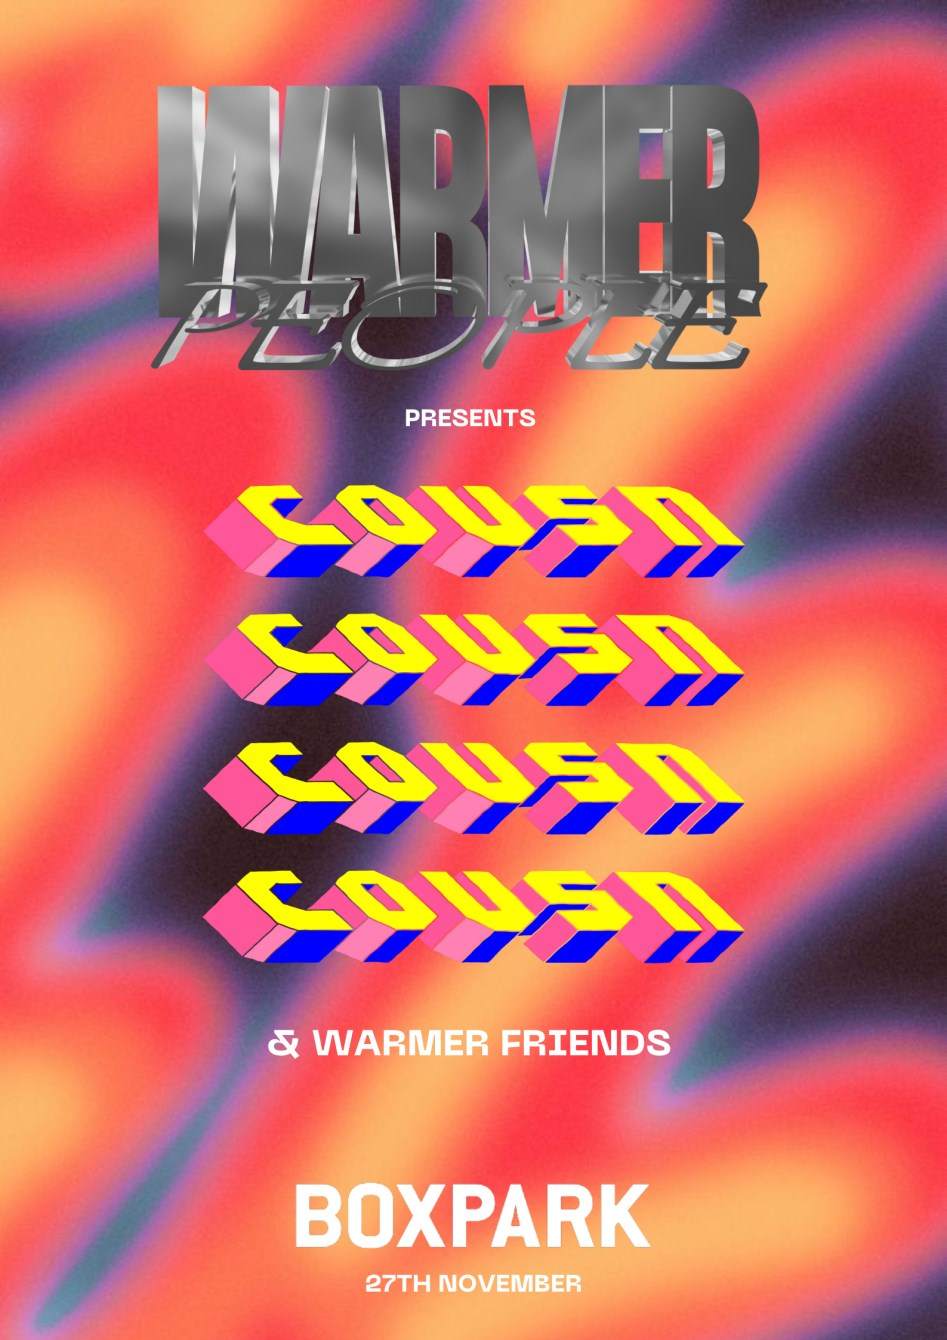 Warmer People X Boxpark: Cousn & Warmer Friends - フライヤー表